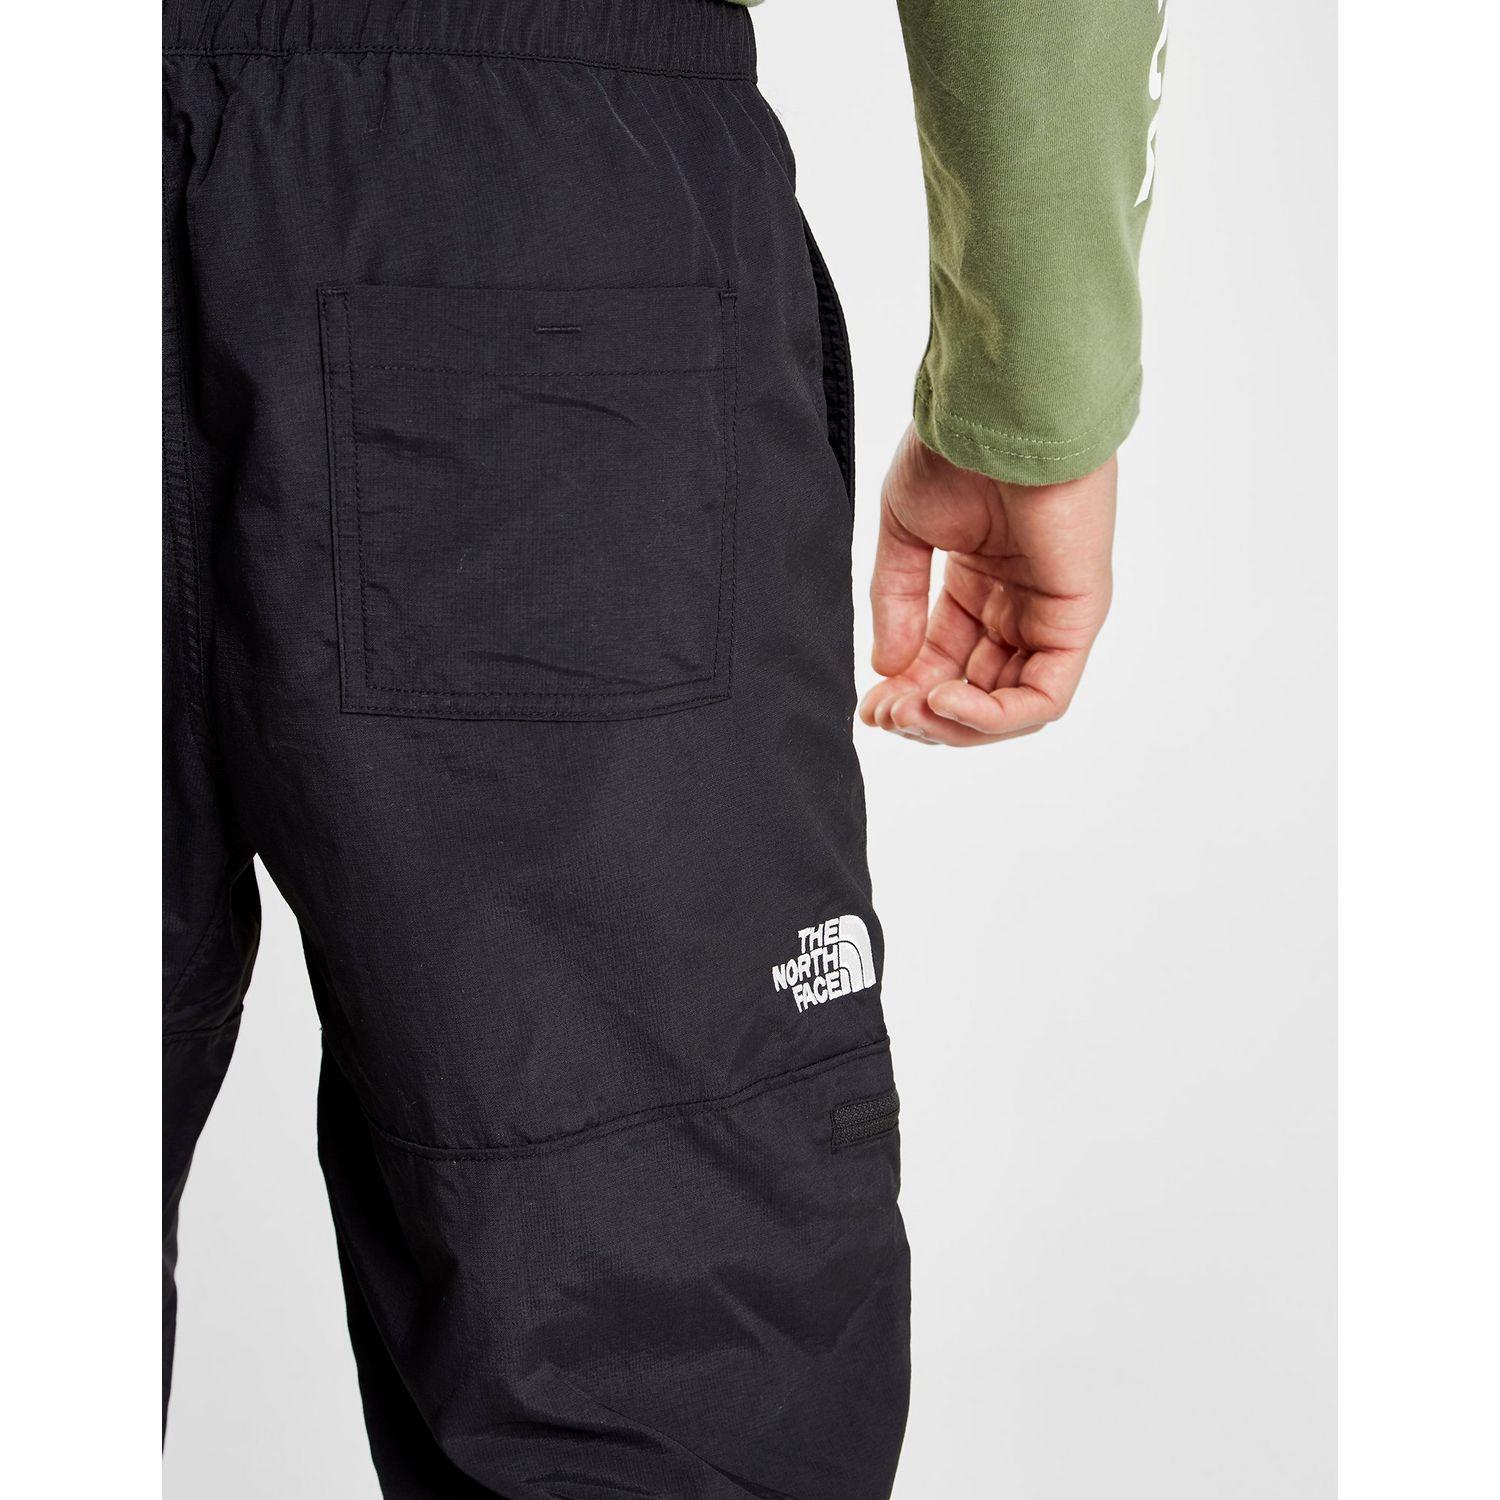 The North Face Synthetic Z-pocket Cargo Track Pants in Black for Men - Lyst